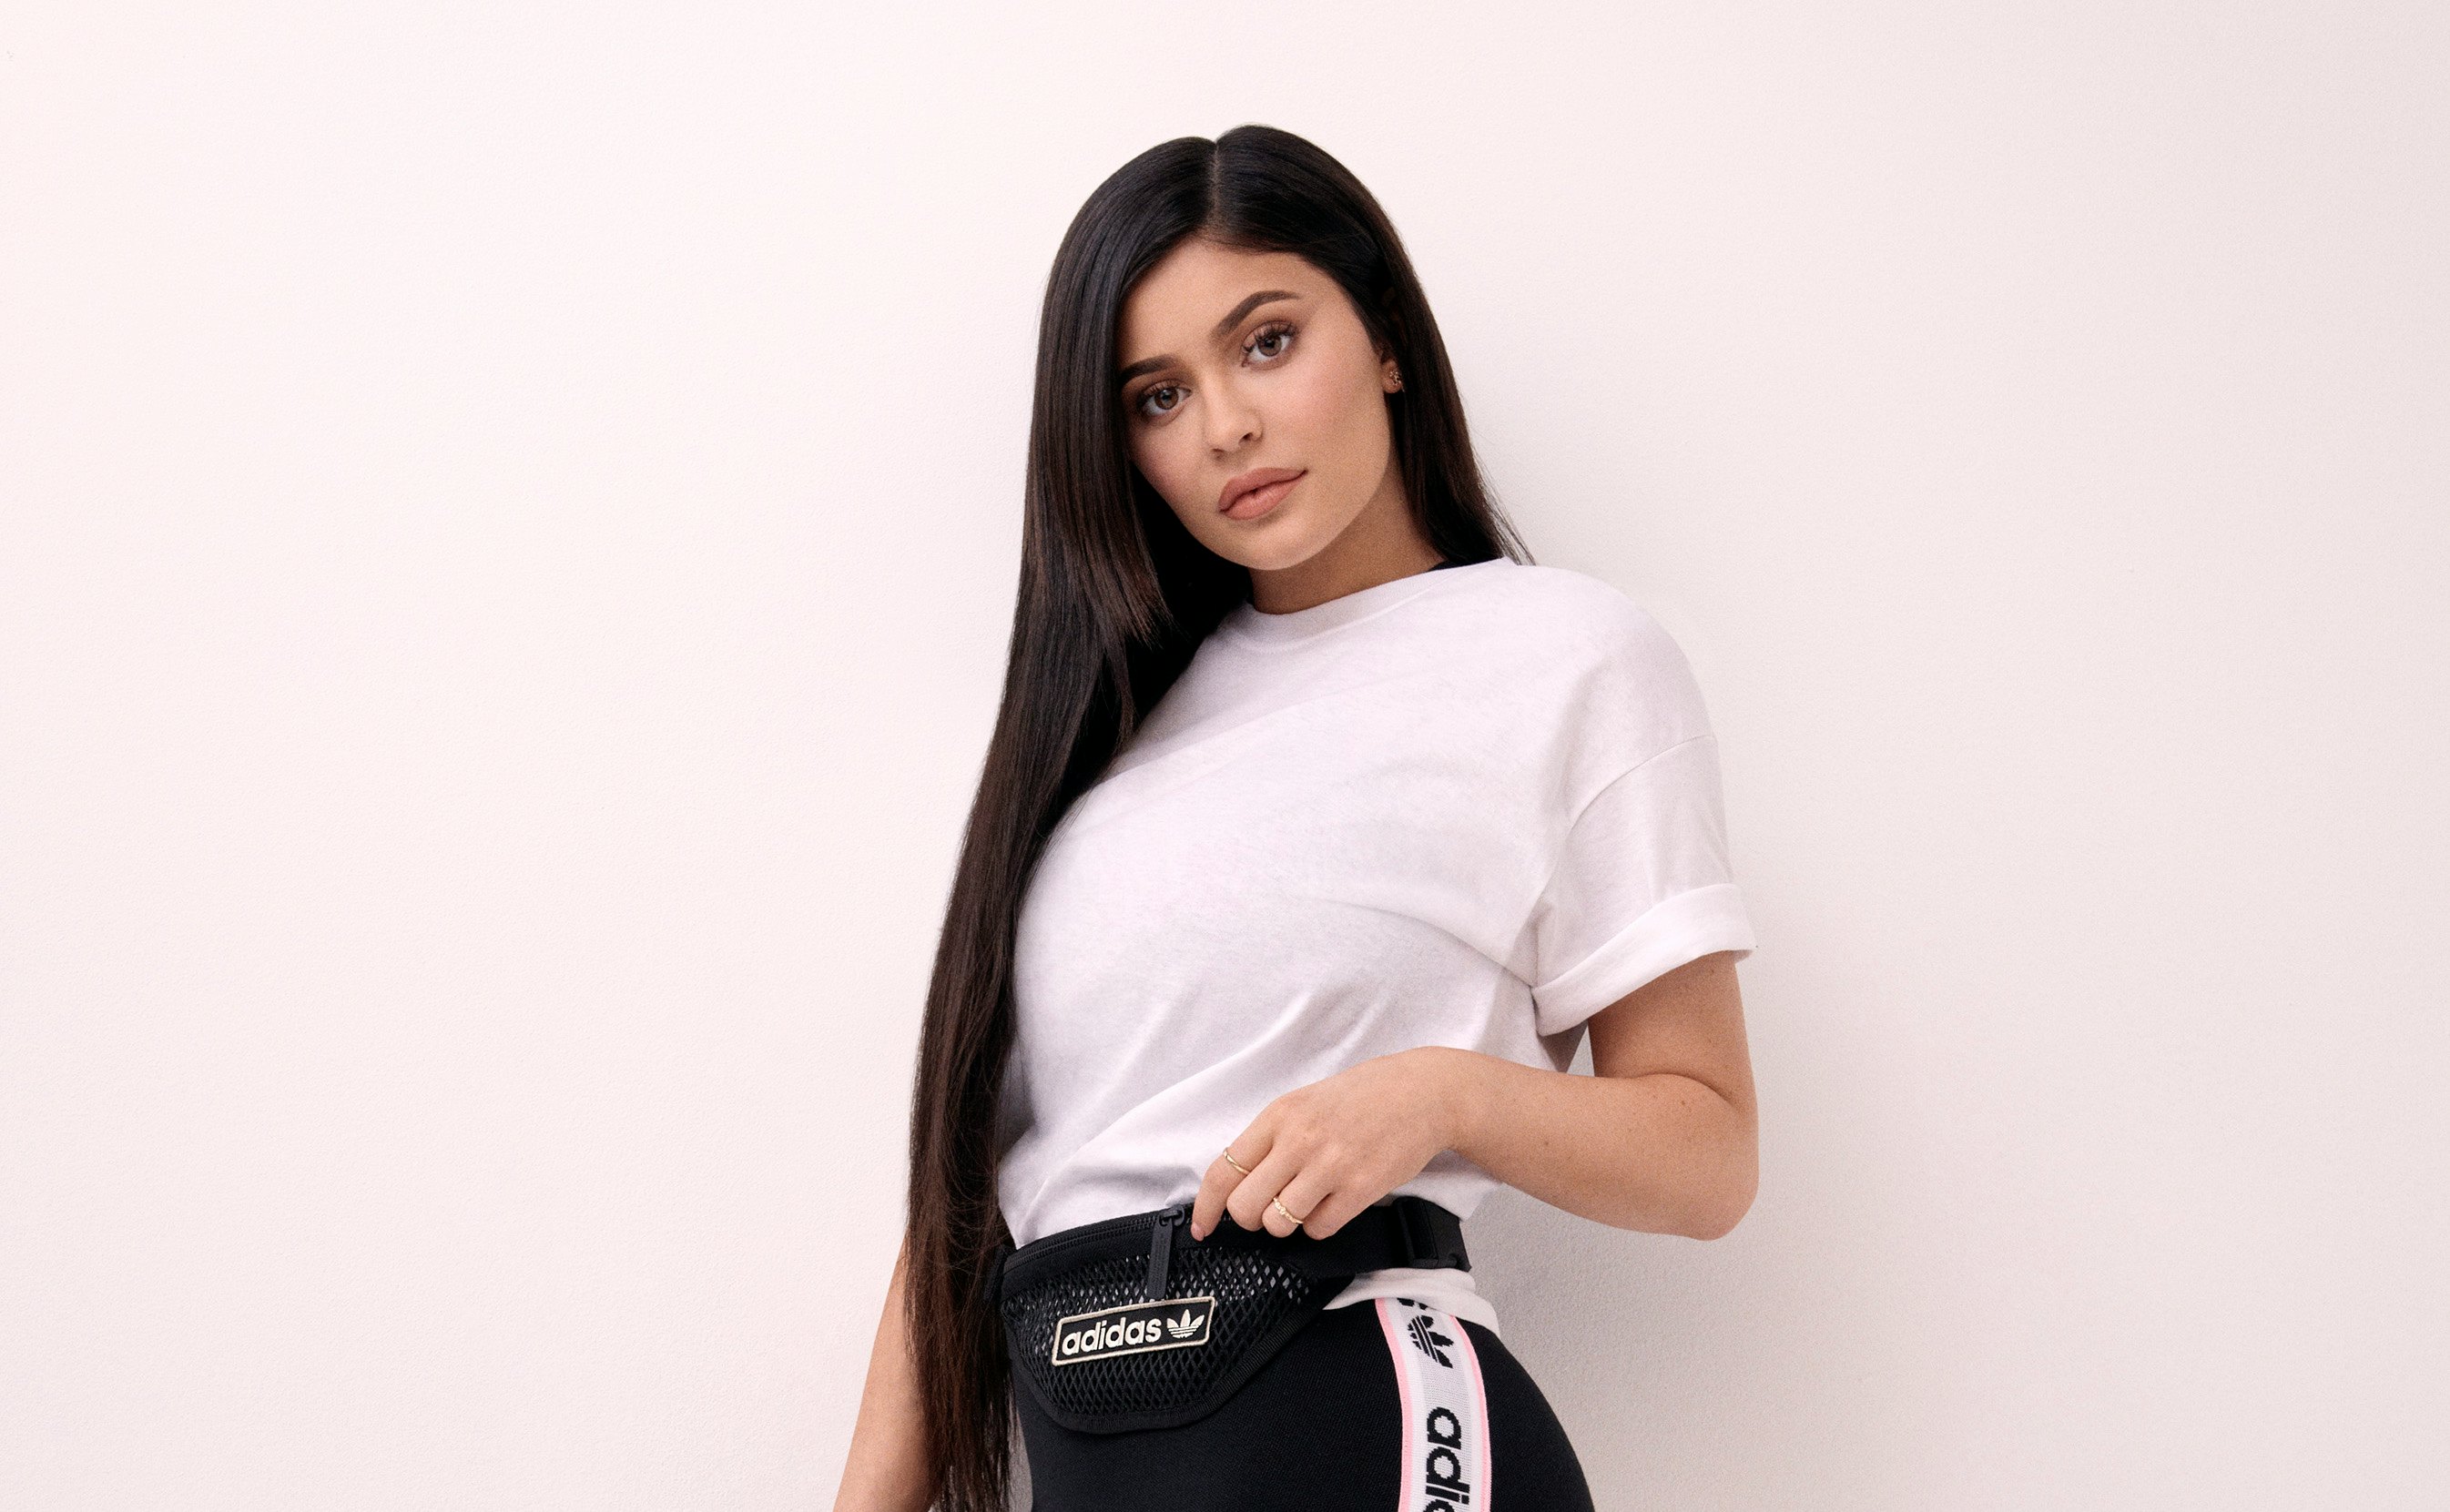 kylie jenner pink adidas